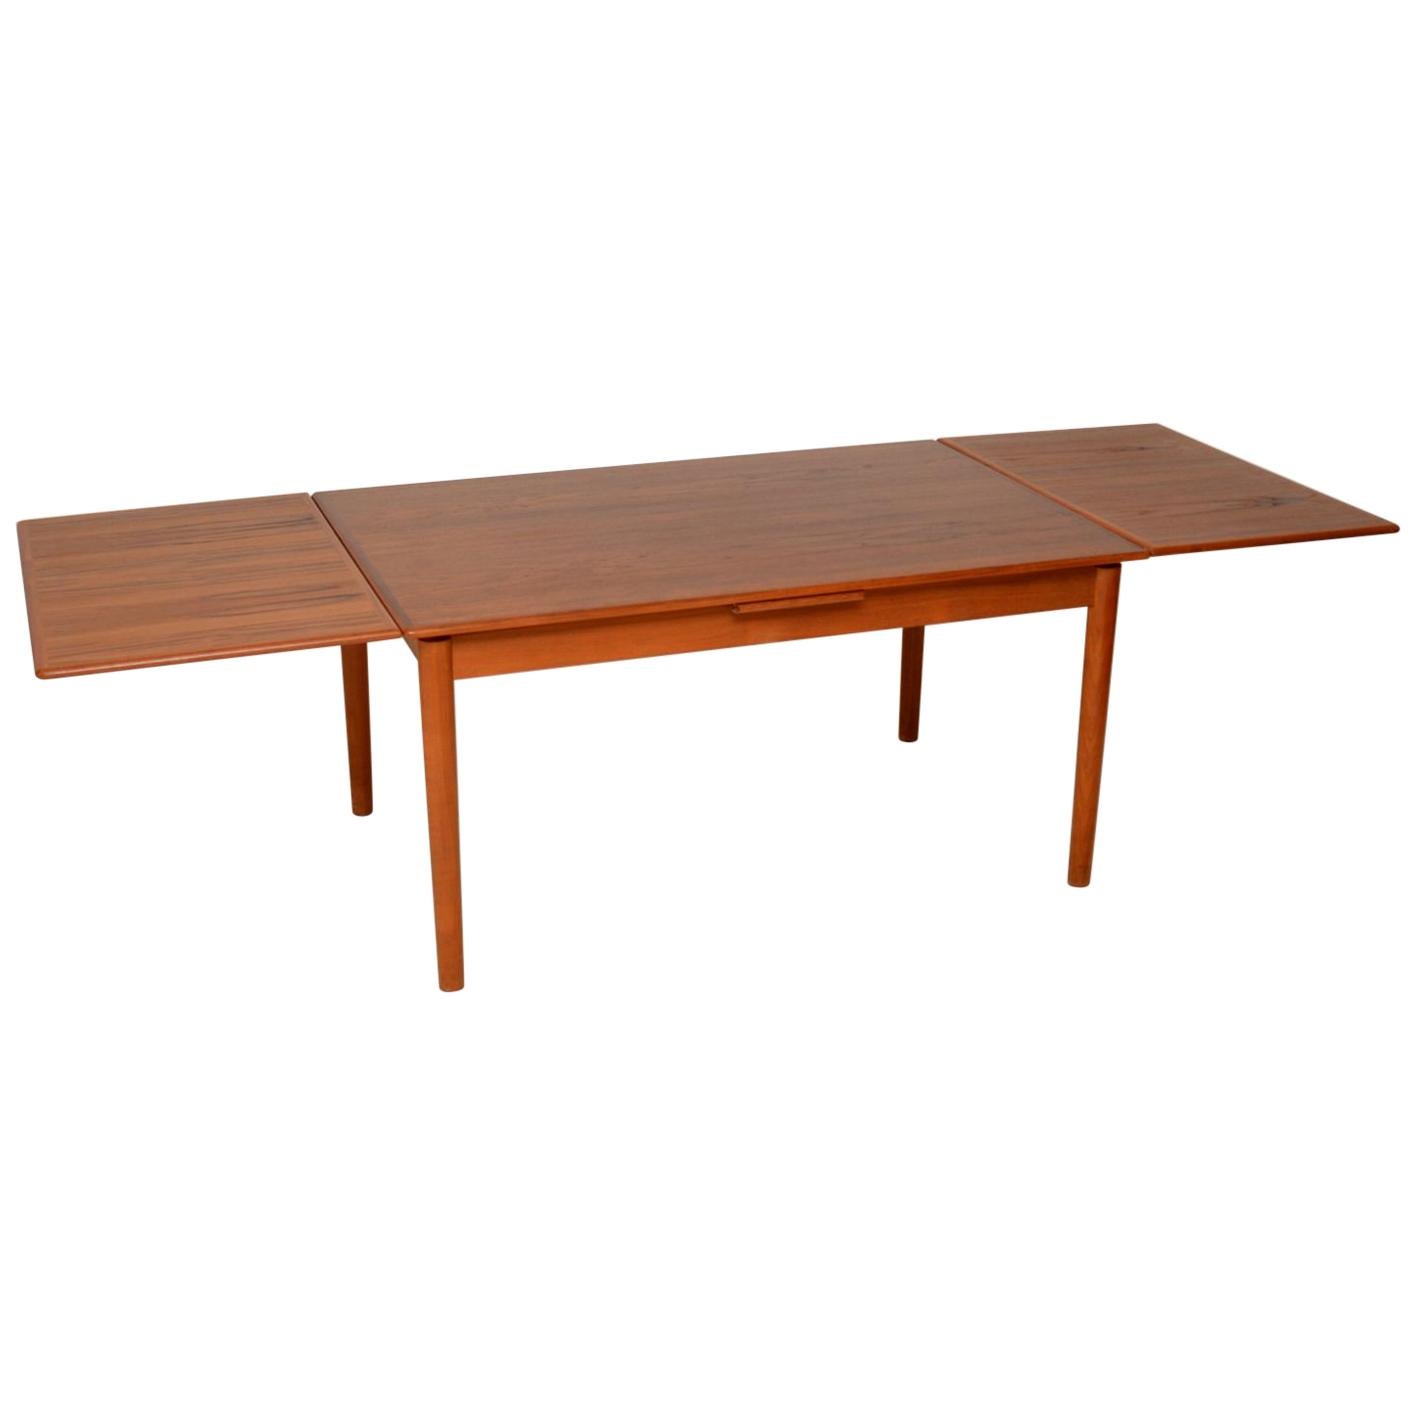 A beautiful and top quality vintage Danish extending dining table in teak, dating from the 1960s-1970s. This is really well made, it has two drawer leaves that can be pulled out to extend this to a ten seater. It is also possible to pull out one